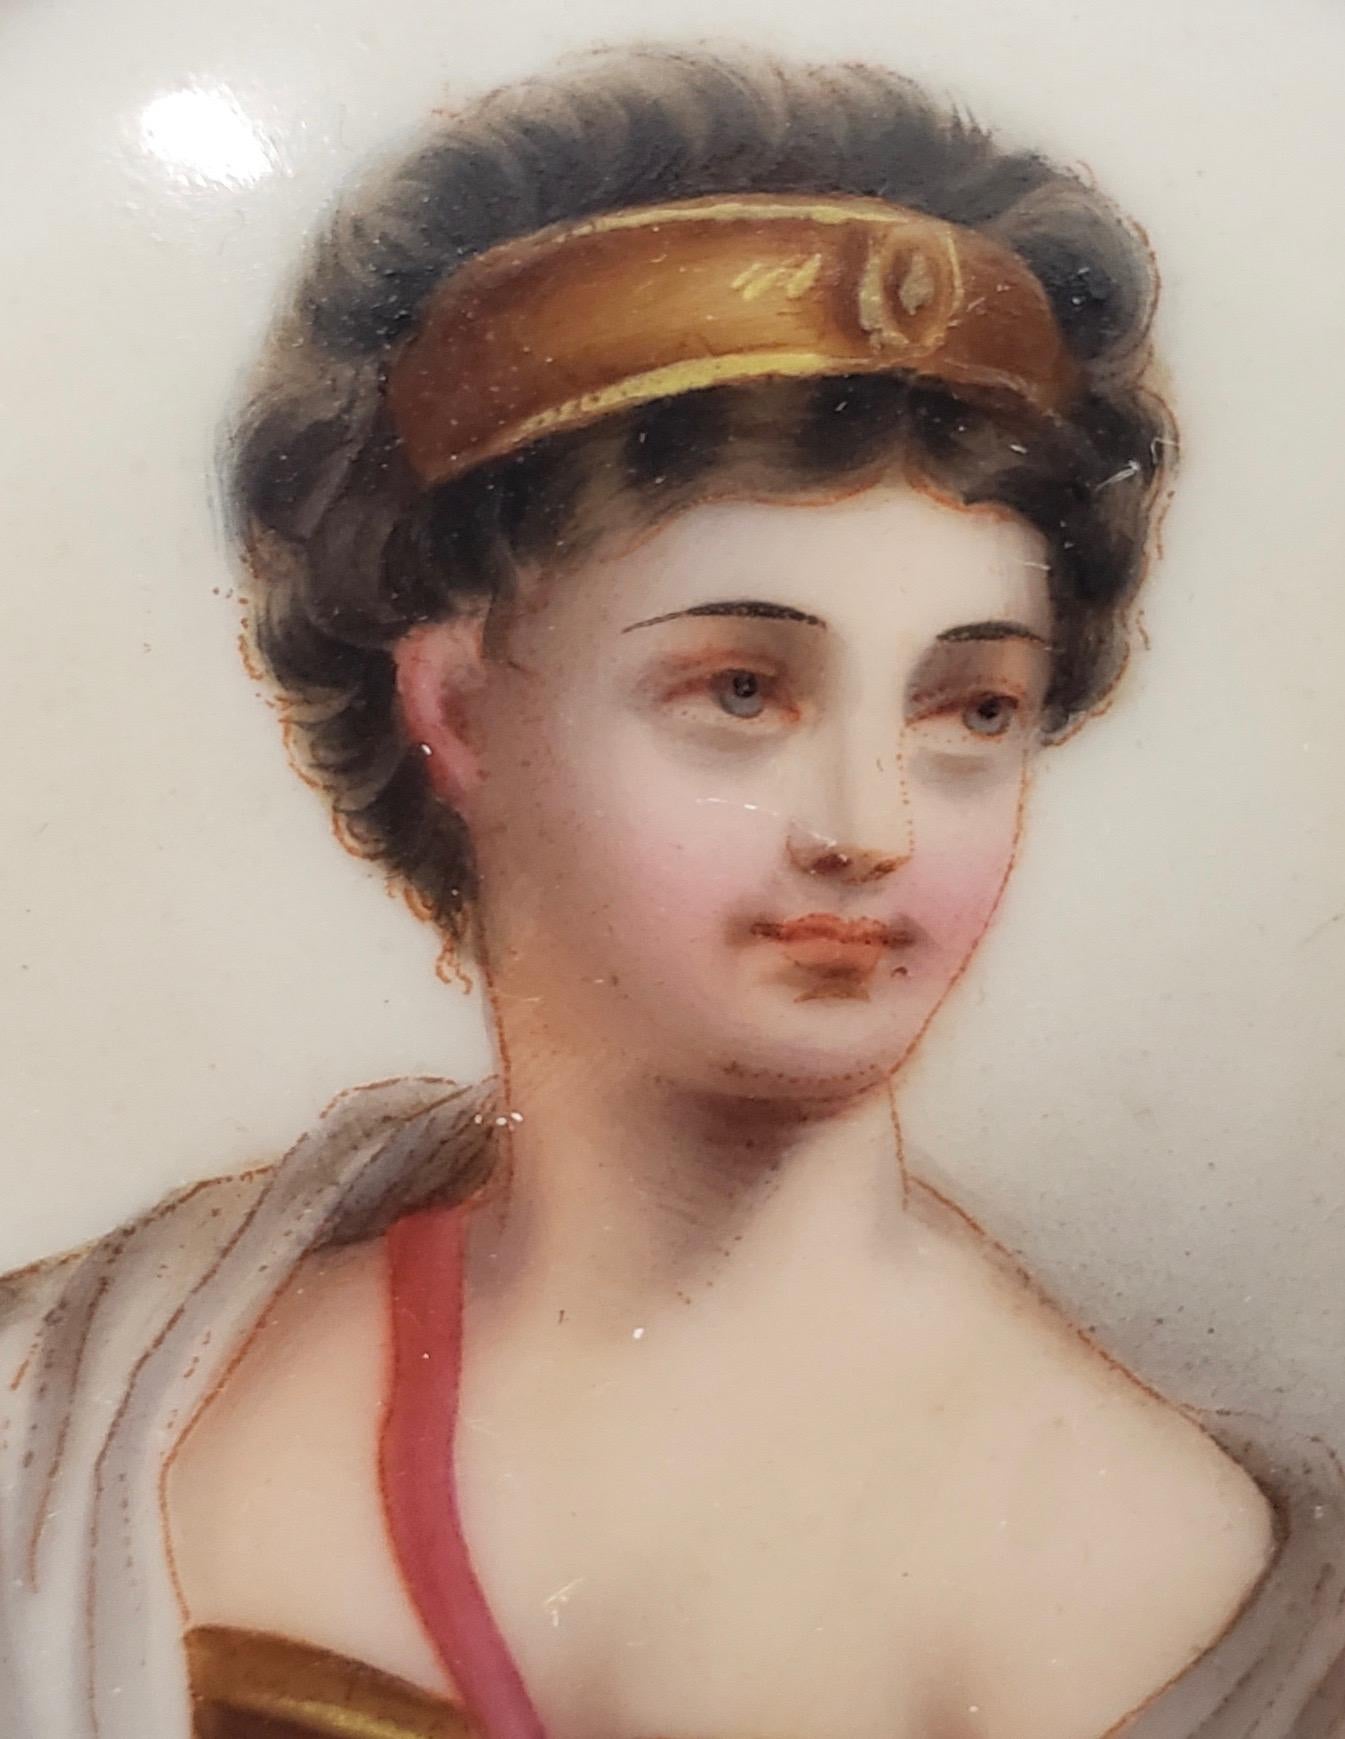 Fine 19th century miniature portrait on porcelain of a beautiful young woman

A finely detailed portrait of a young woman with short auburn hair and a gold head band.

The porcelain portrait is housed in a gilded brass frame with enamel paint